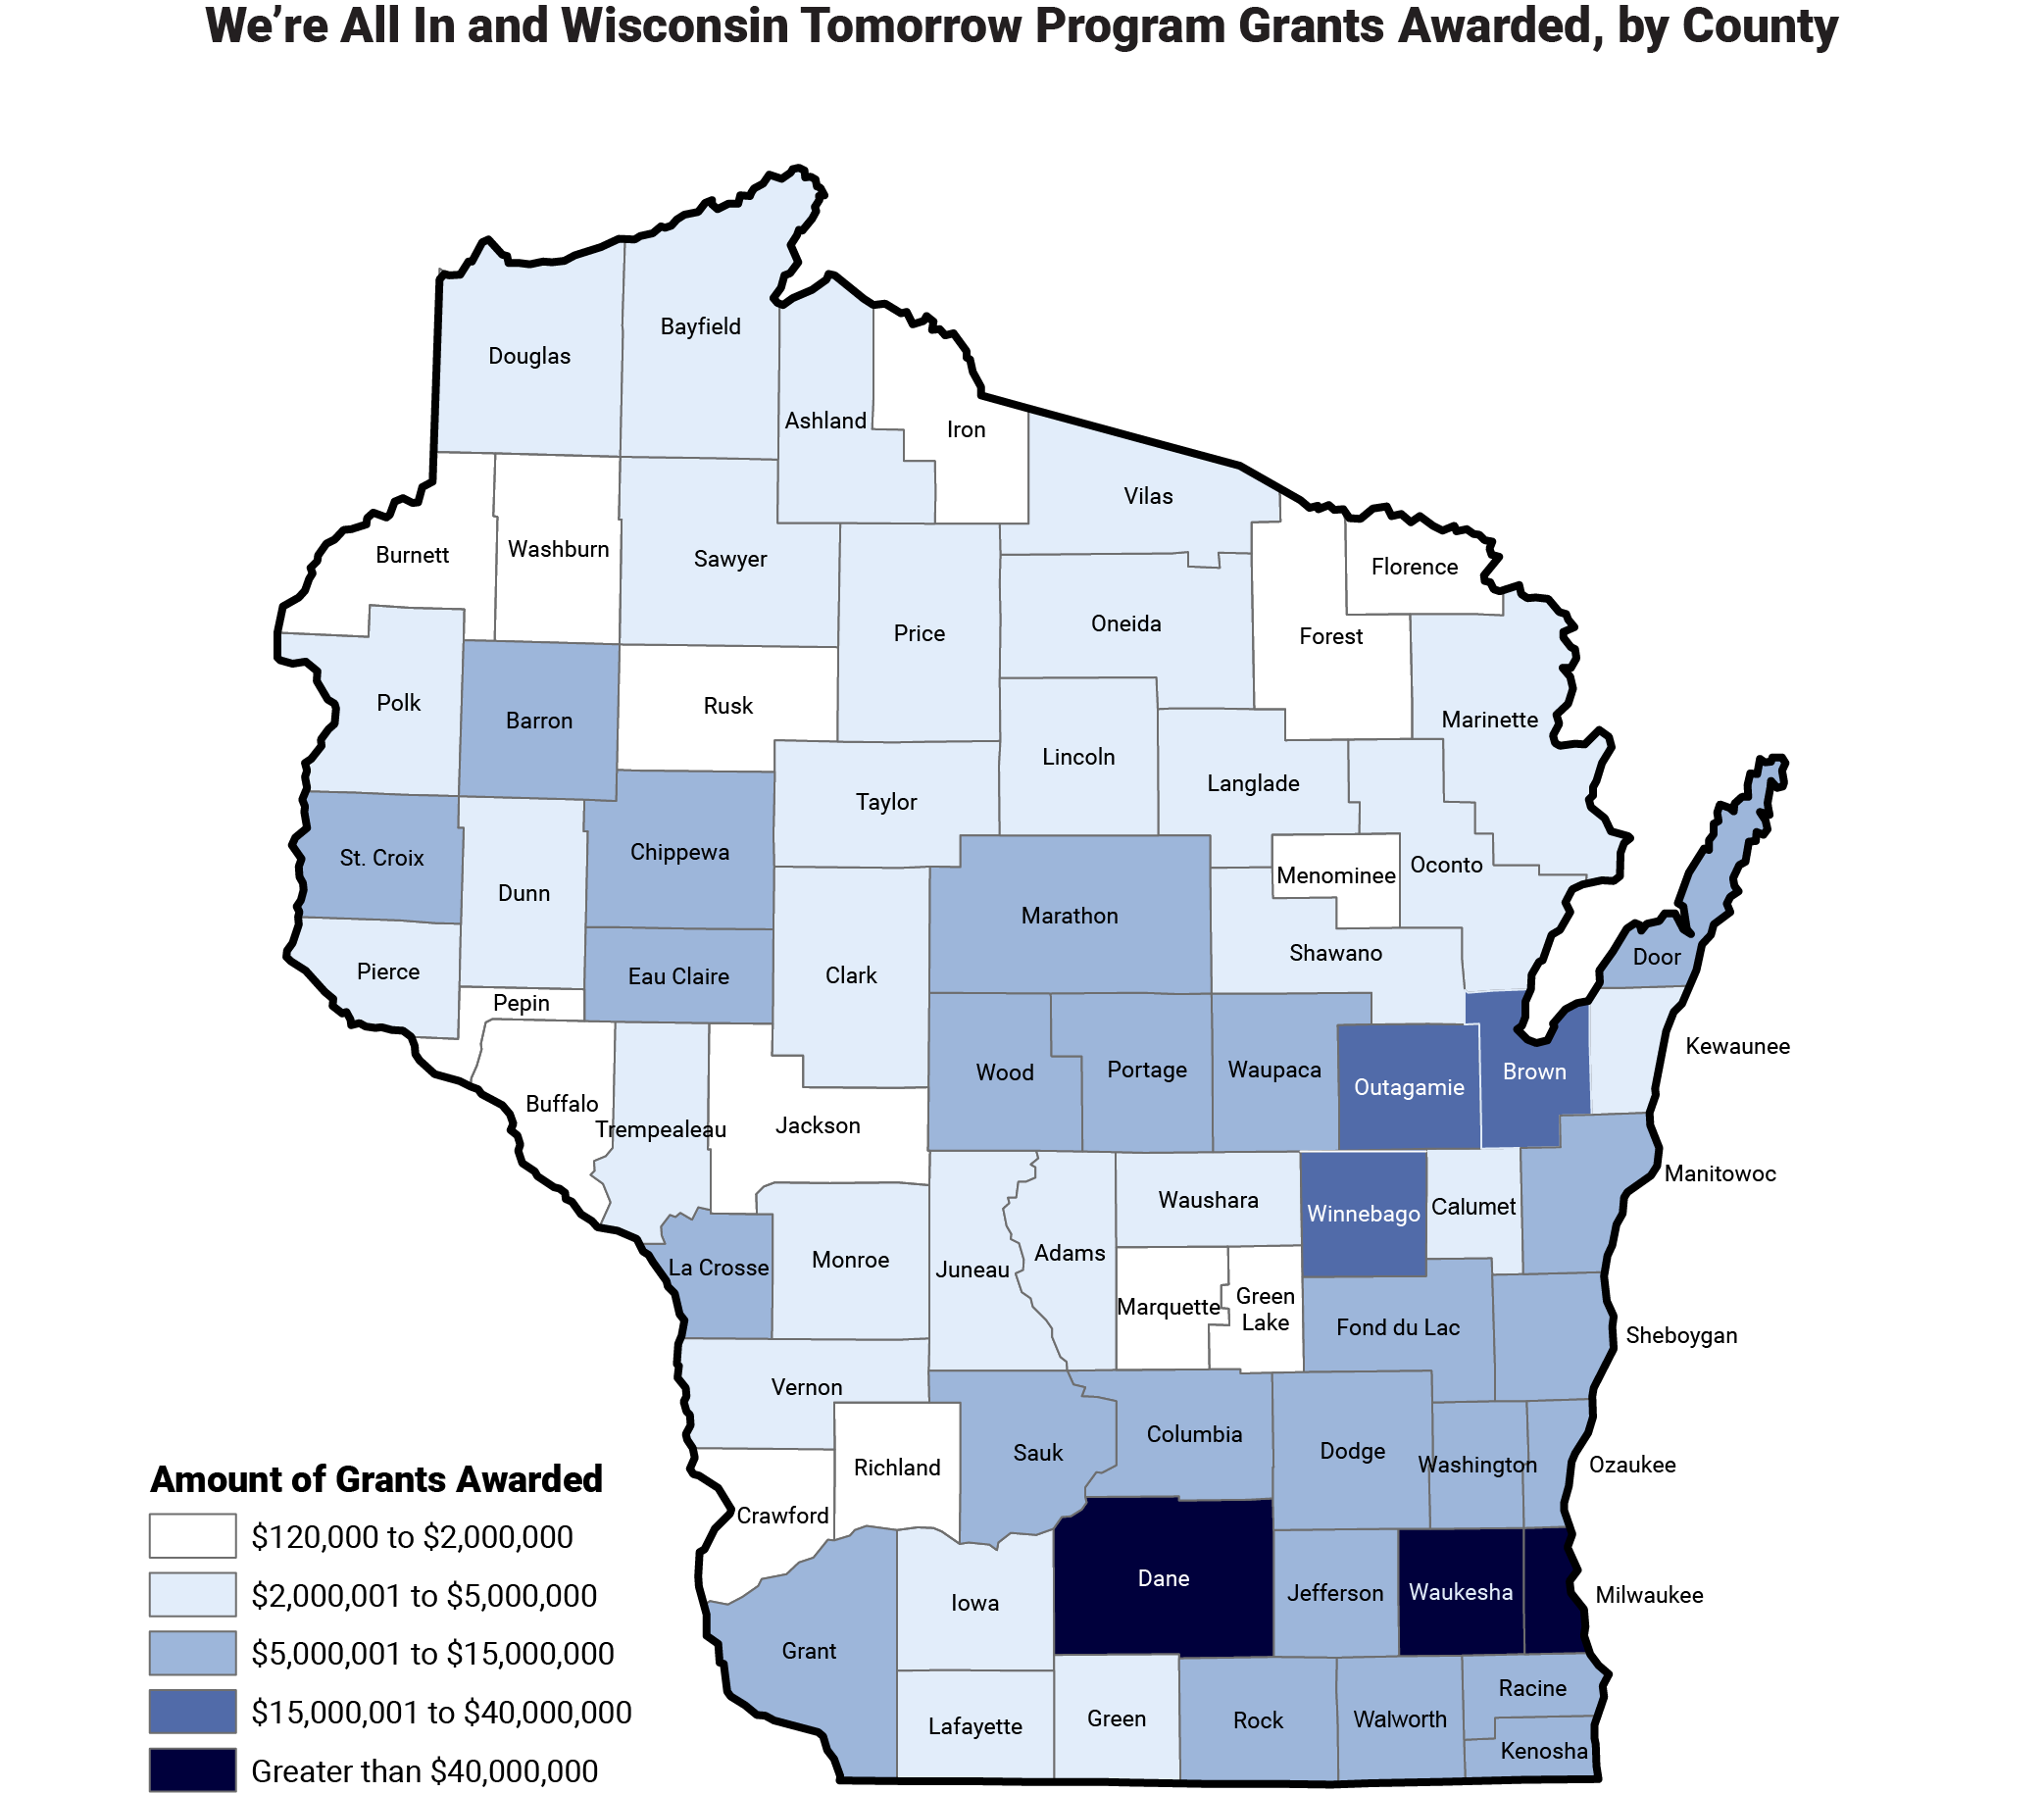 A map showing program grants awarded by county